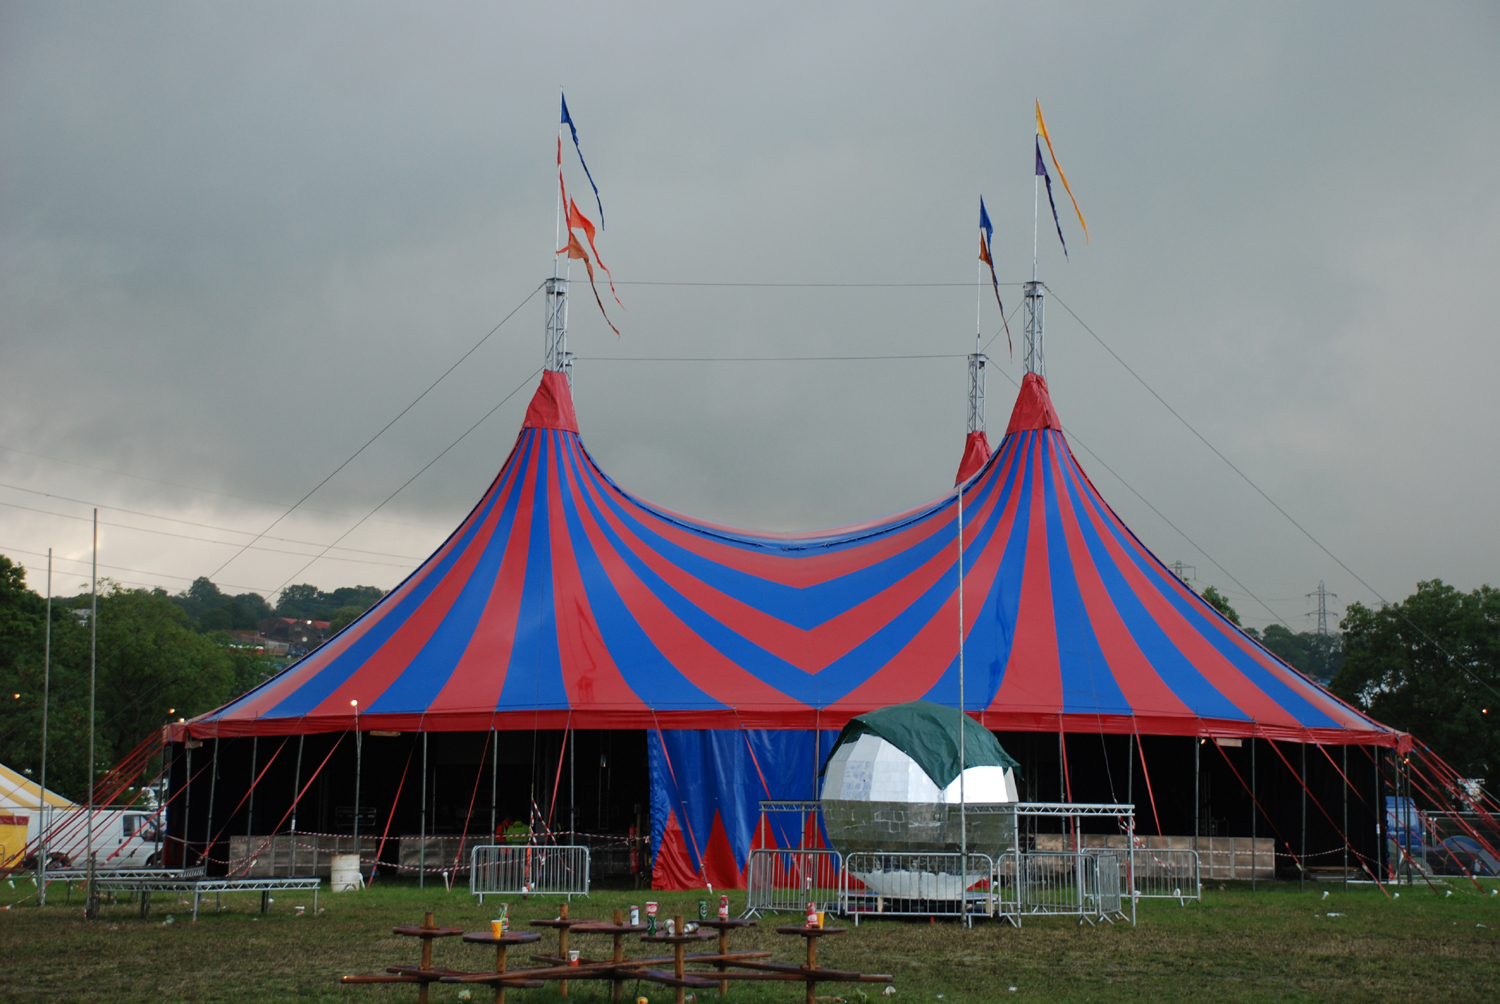 32m Circus Tent - Mobile Structures Circus Tent 32m